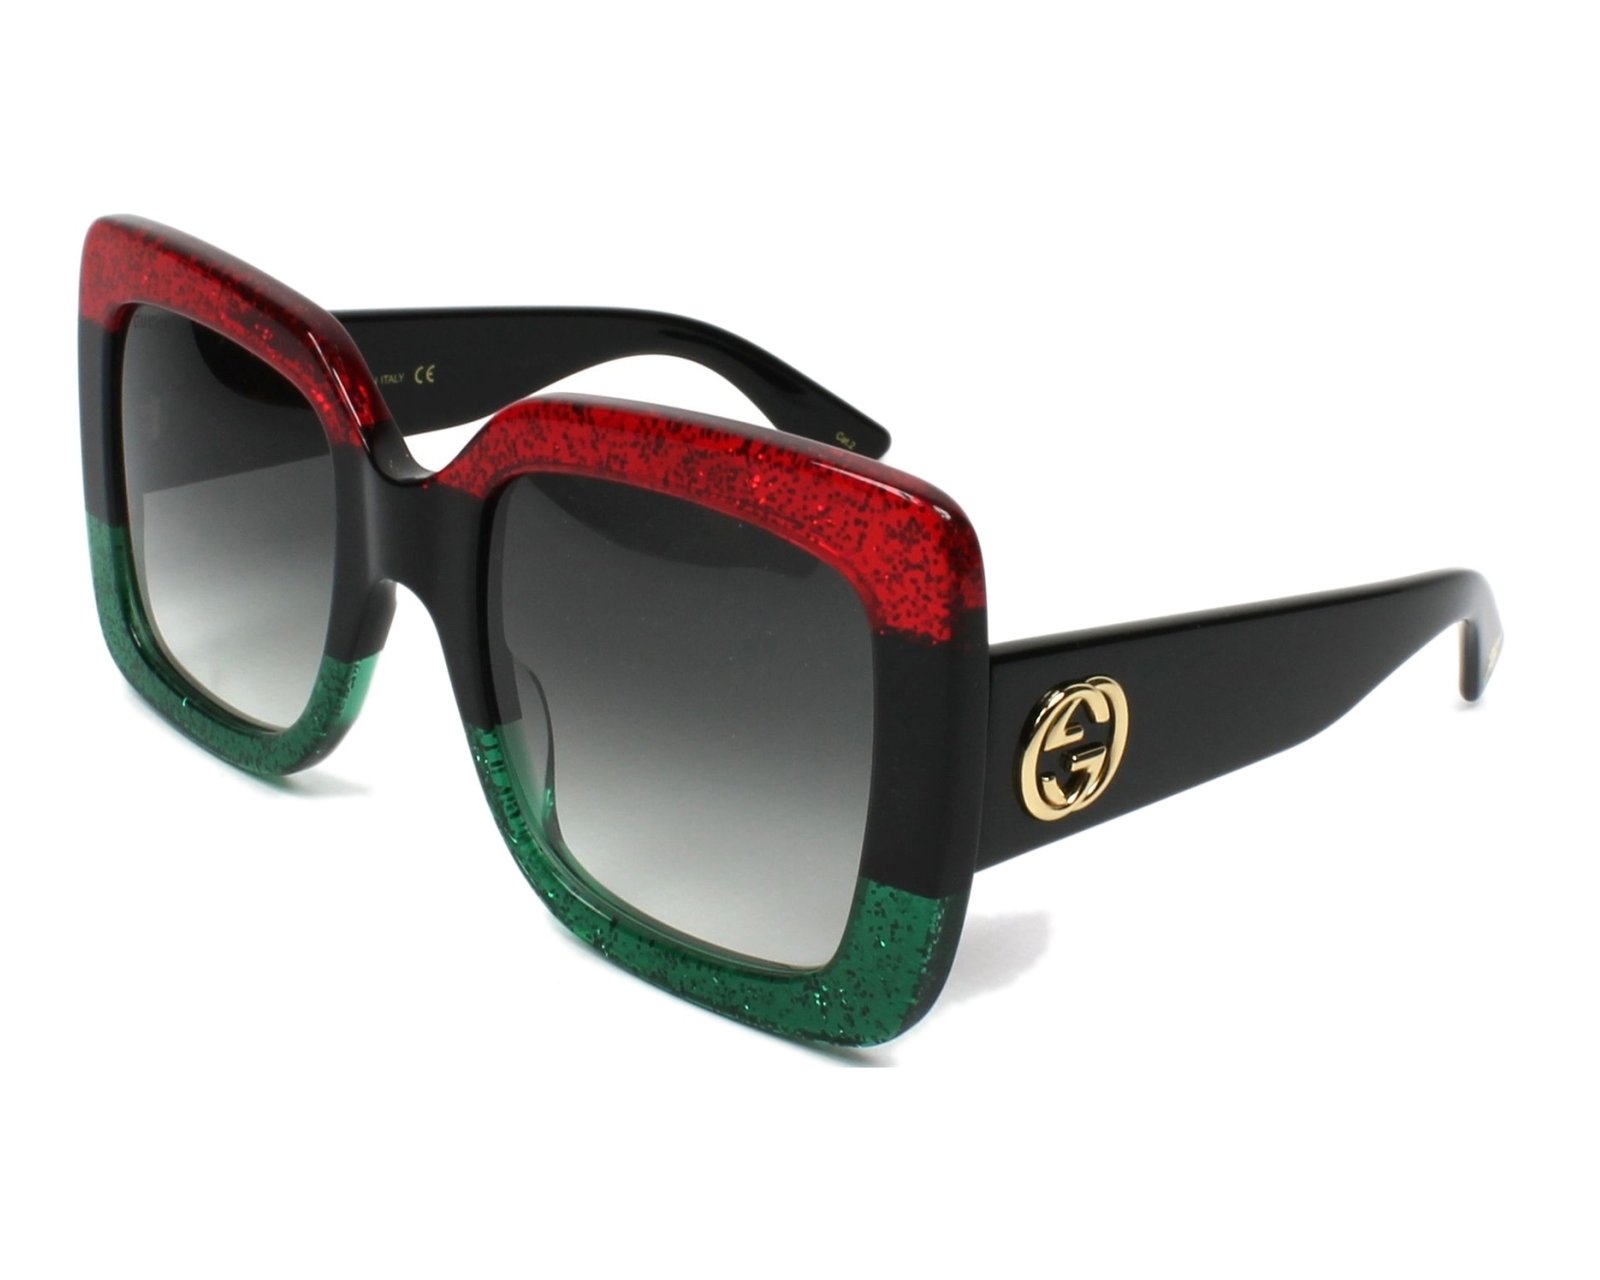 gucci glasses green and red